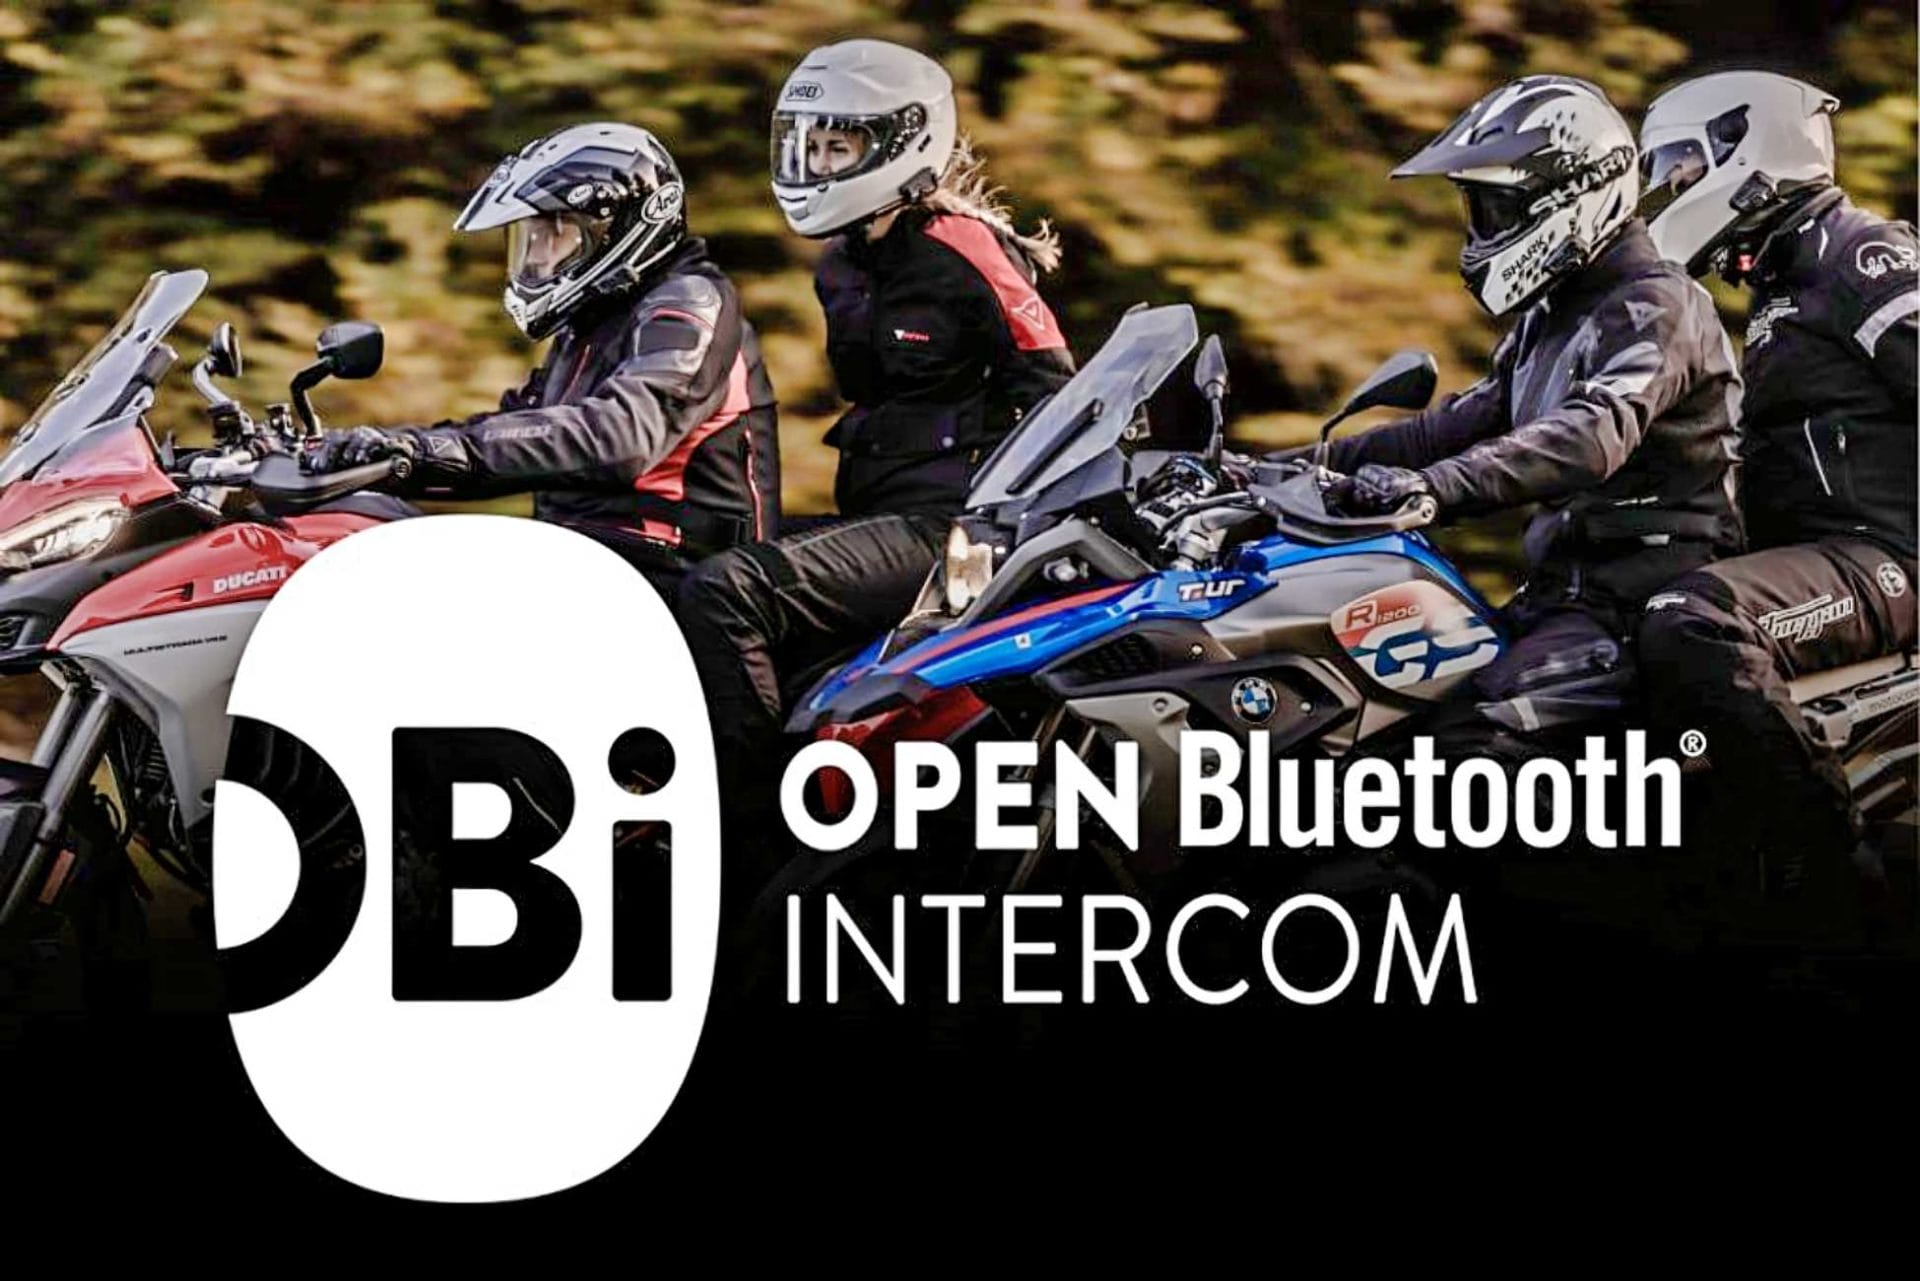 New standard for better motorcycle communication: OBI from Cardo Systems